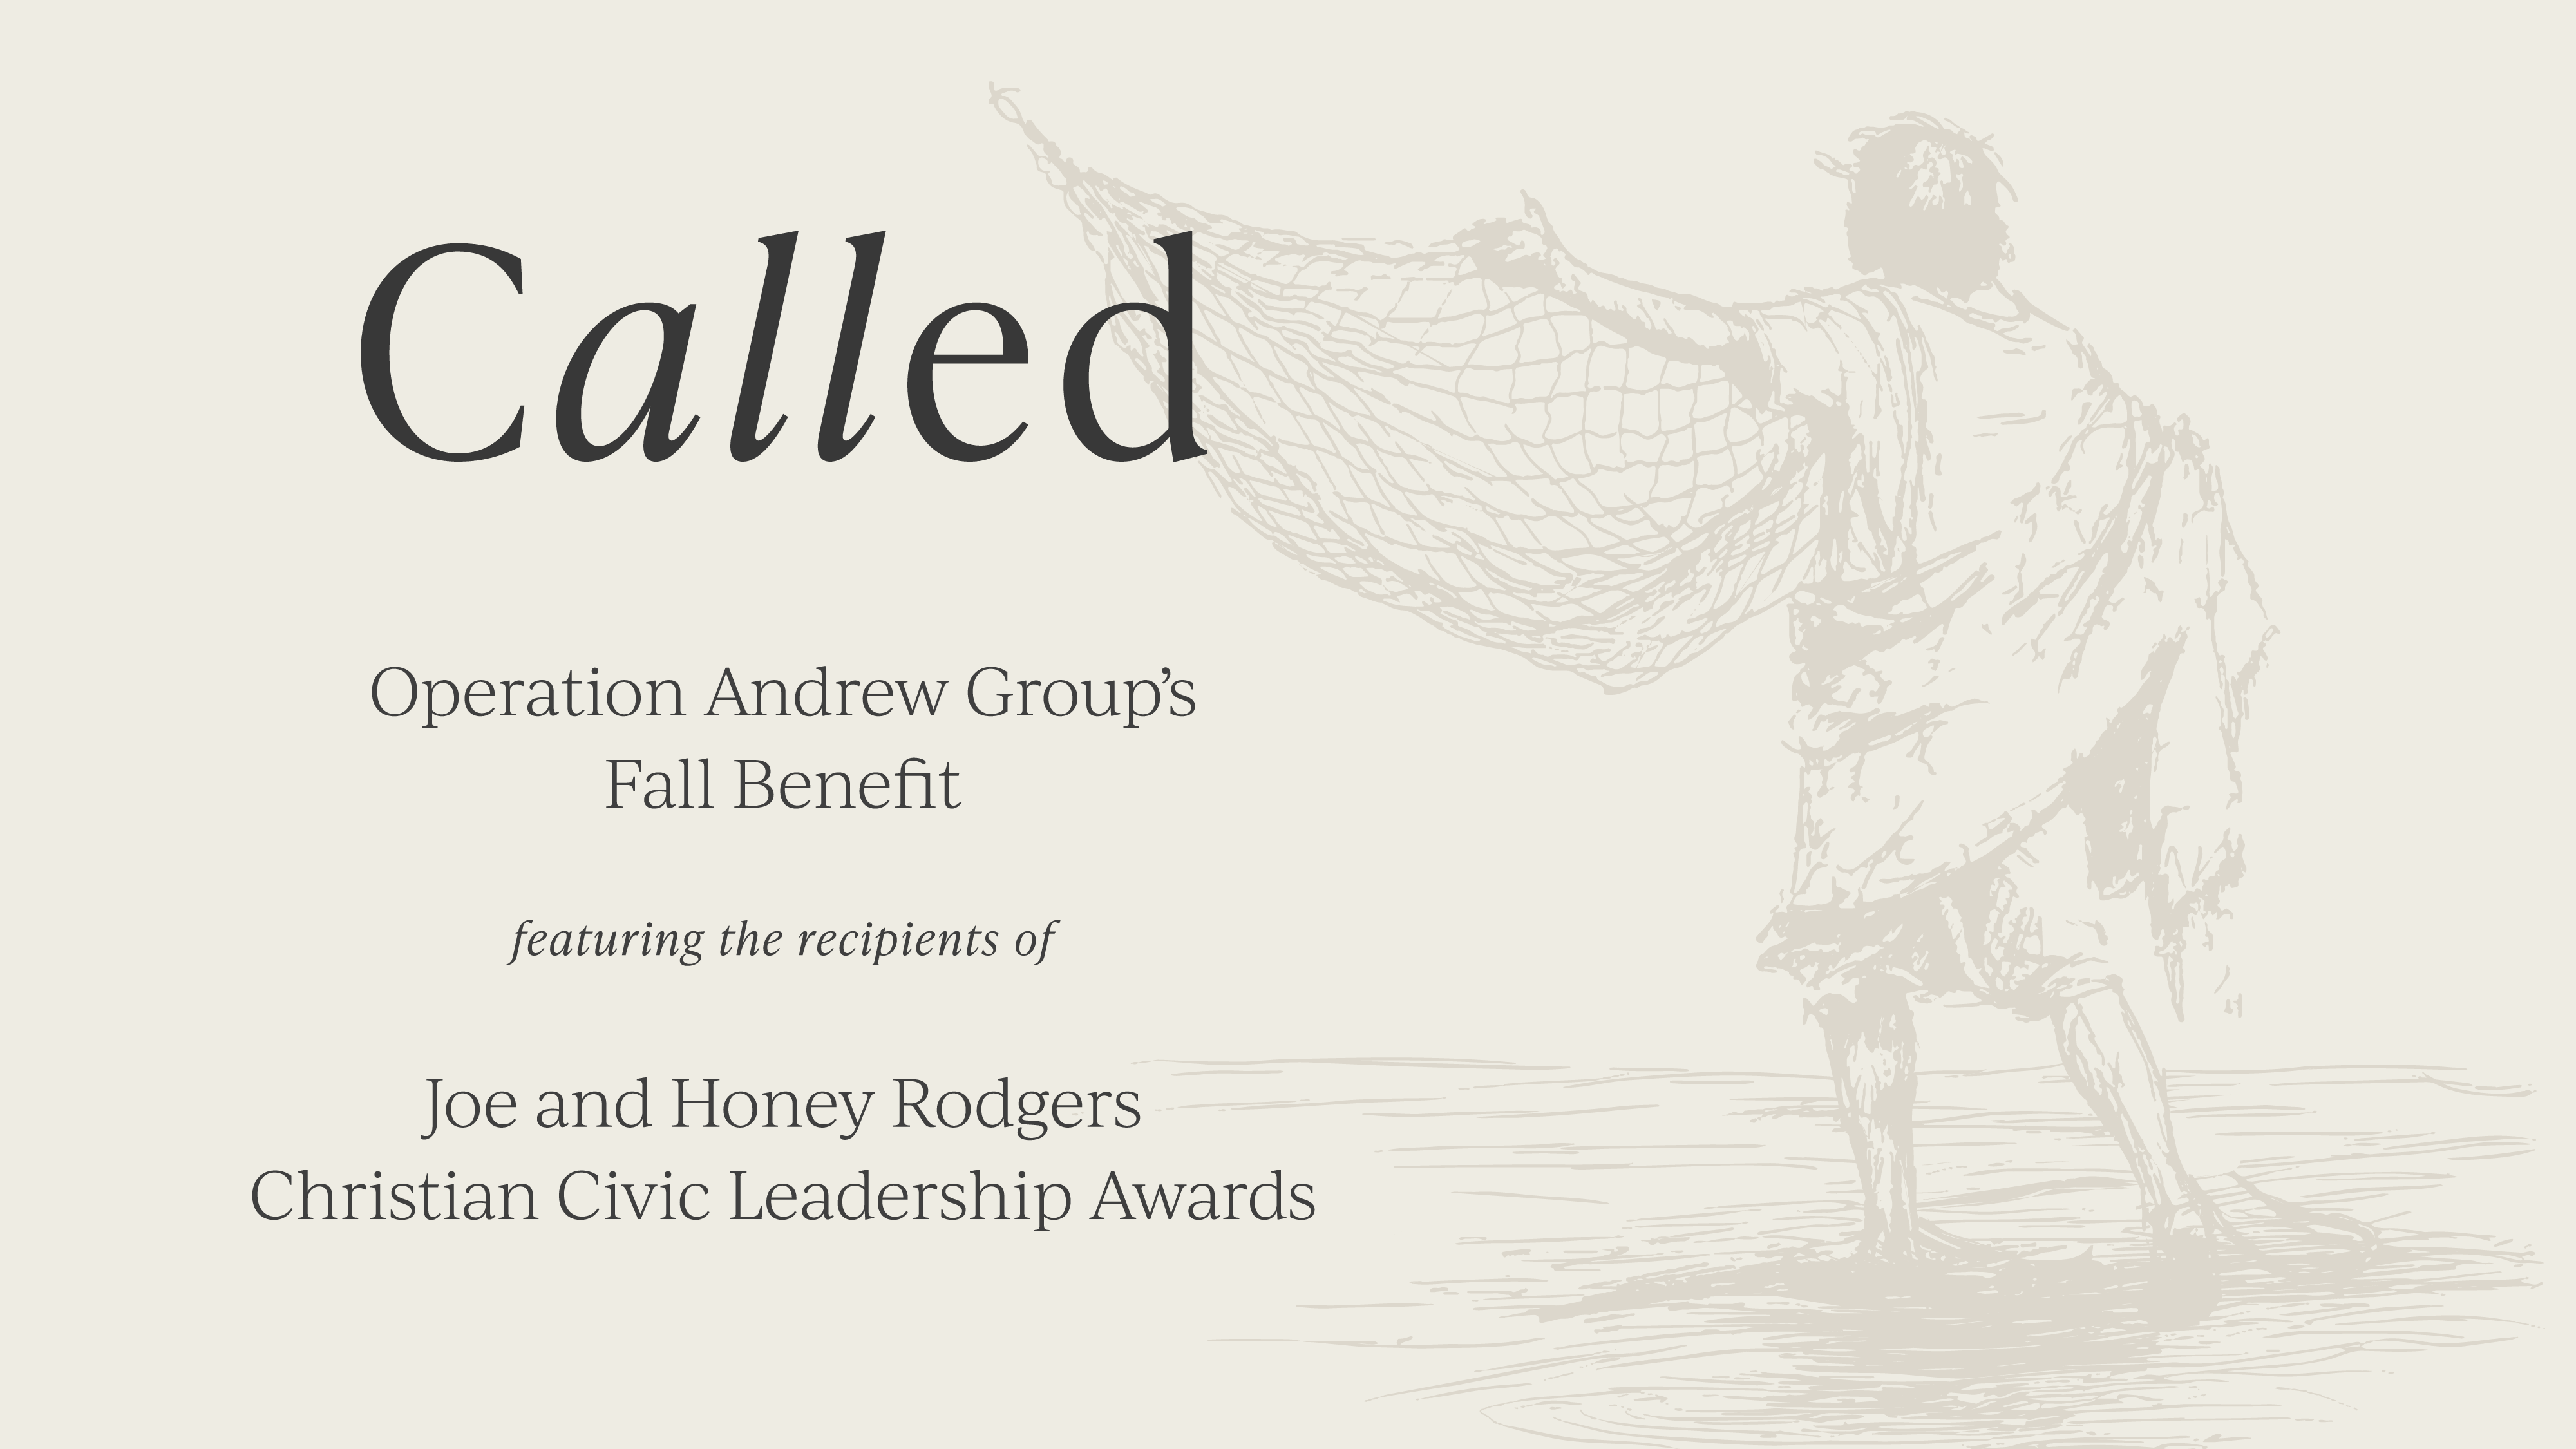 Called, Operation Andrew Group's Fall Benefit, featuring the recipients of the Joe and Honey Rodgers Christian Civic Leadership Awards